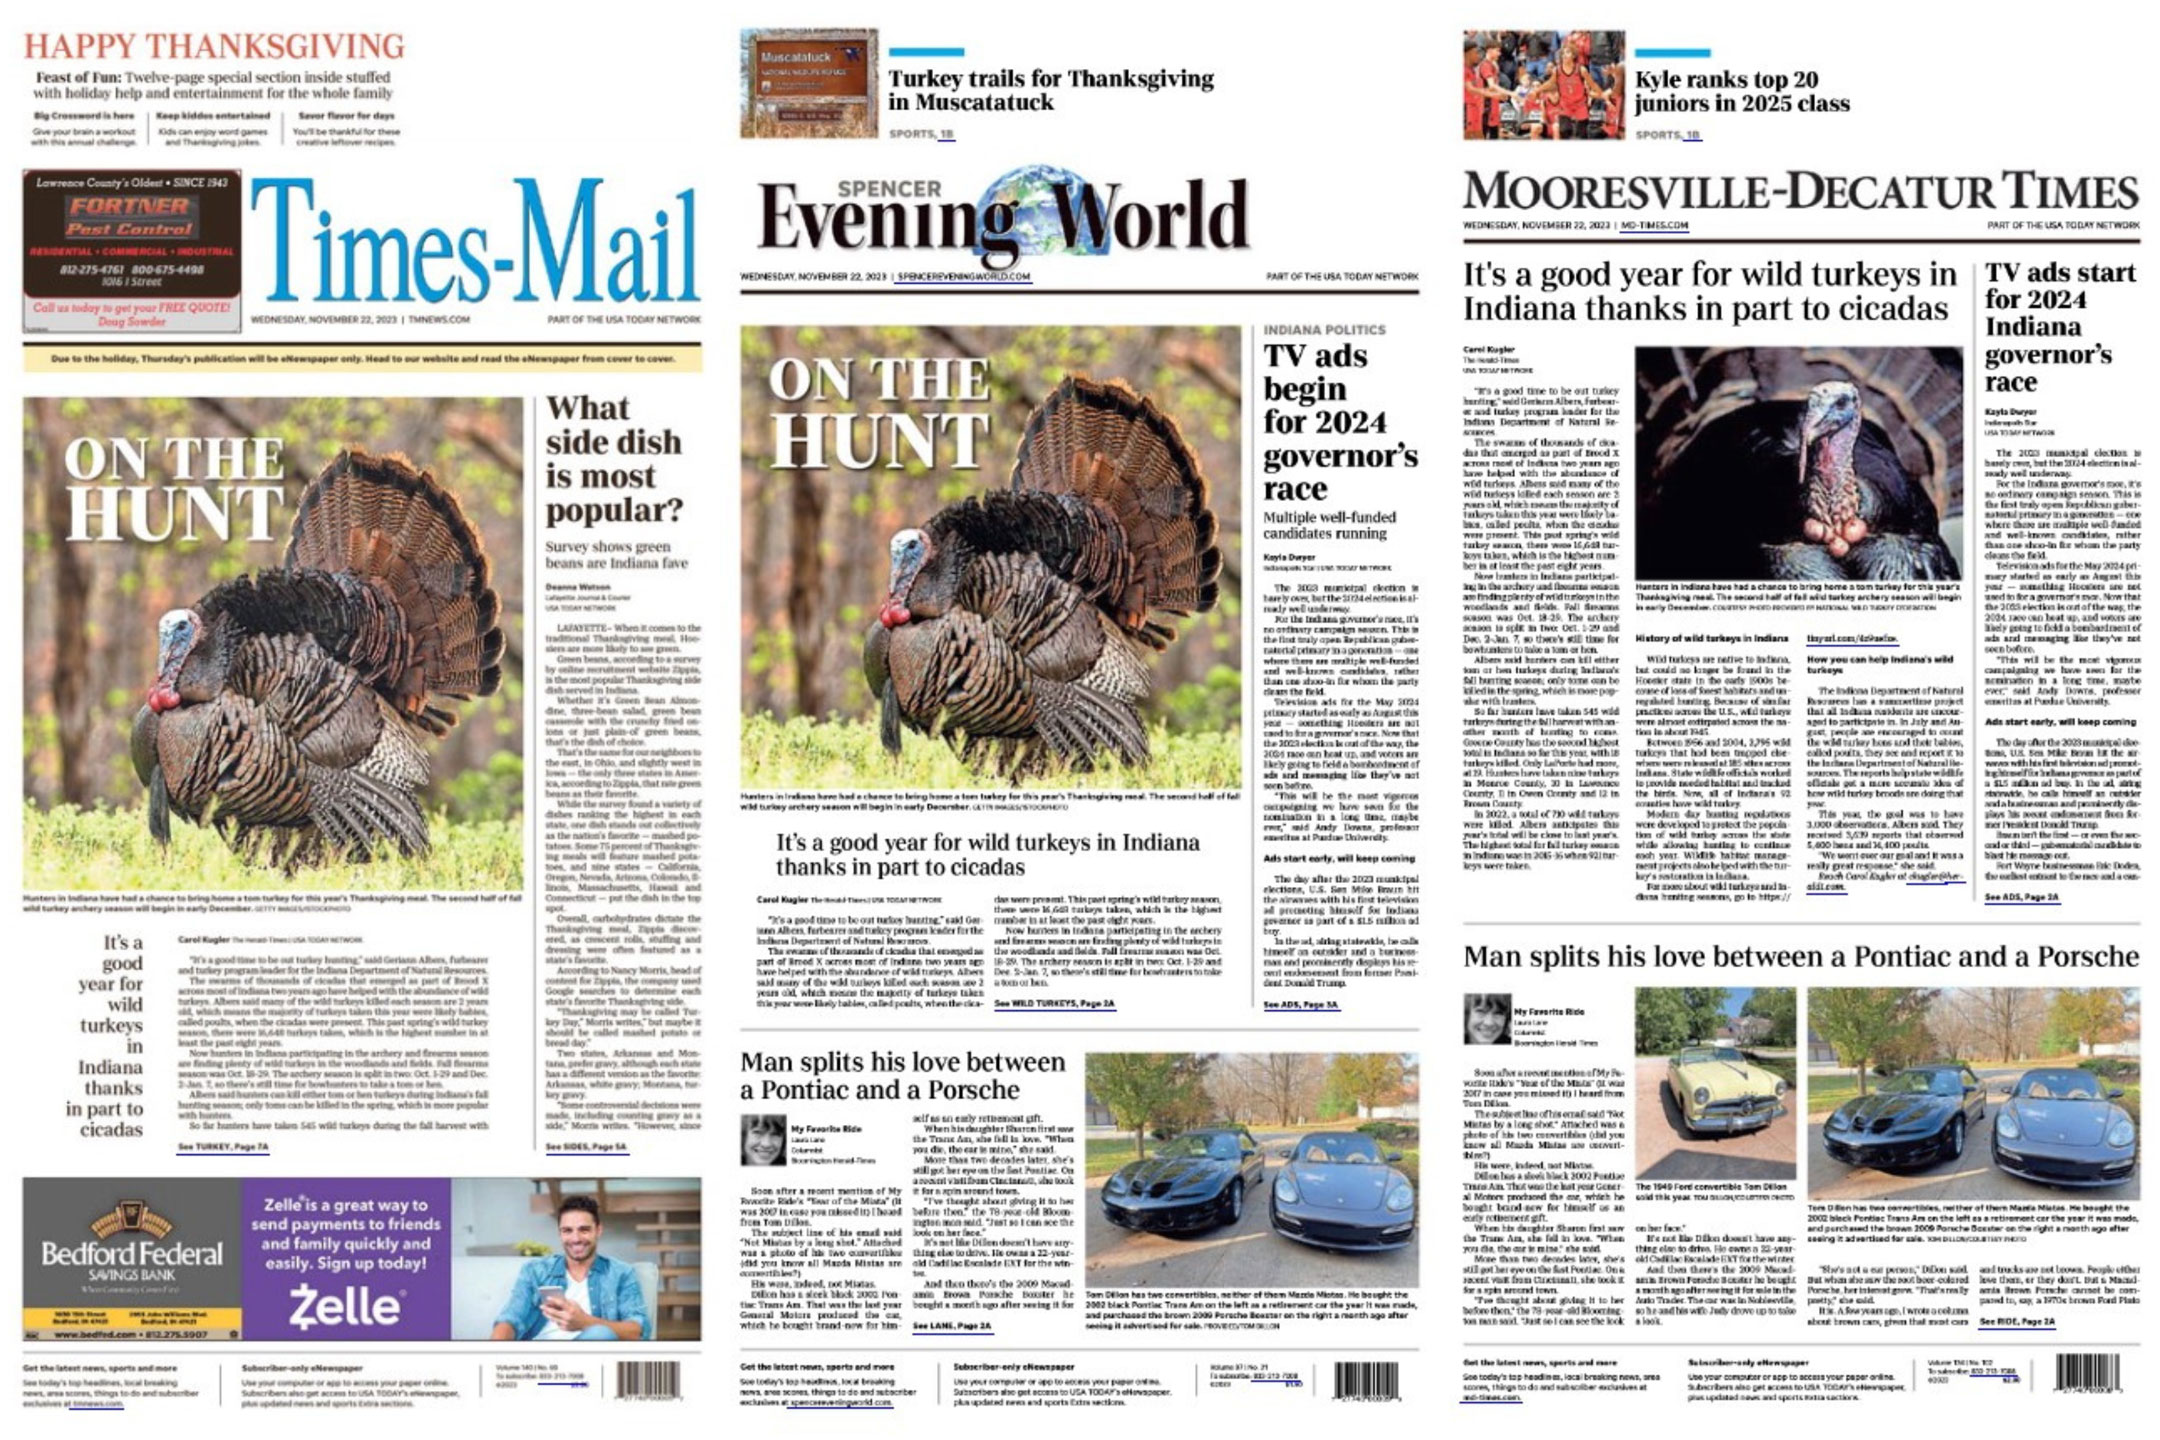 Comparison of the front pages of the Mooresville, Spencer, and Bedford newspapers, showing very similar headlines and photography.